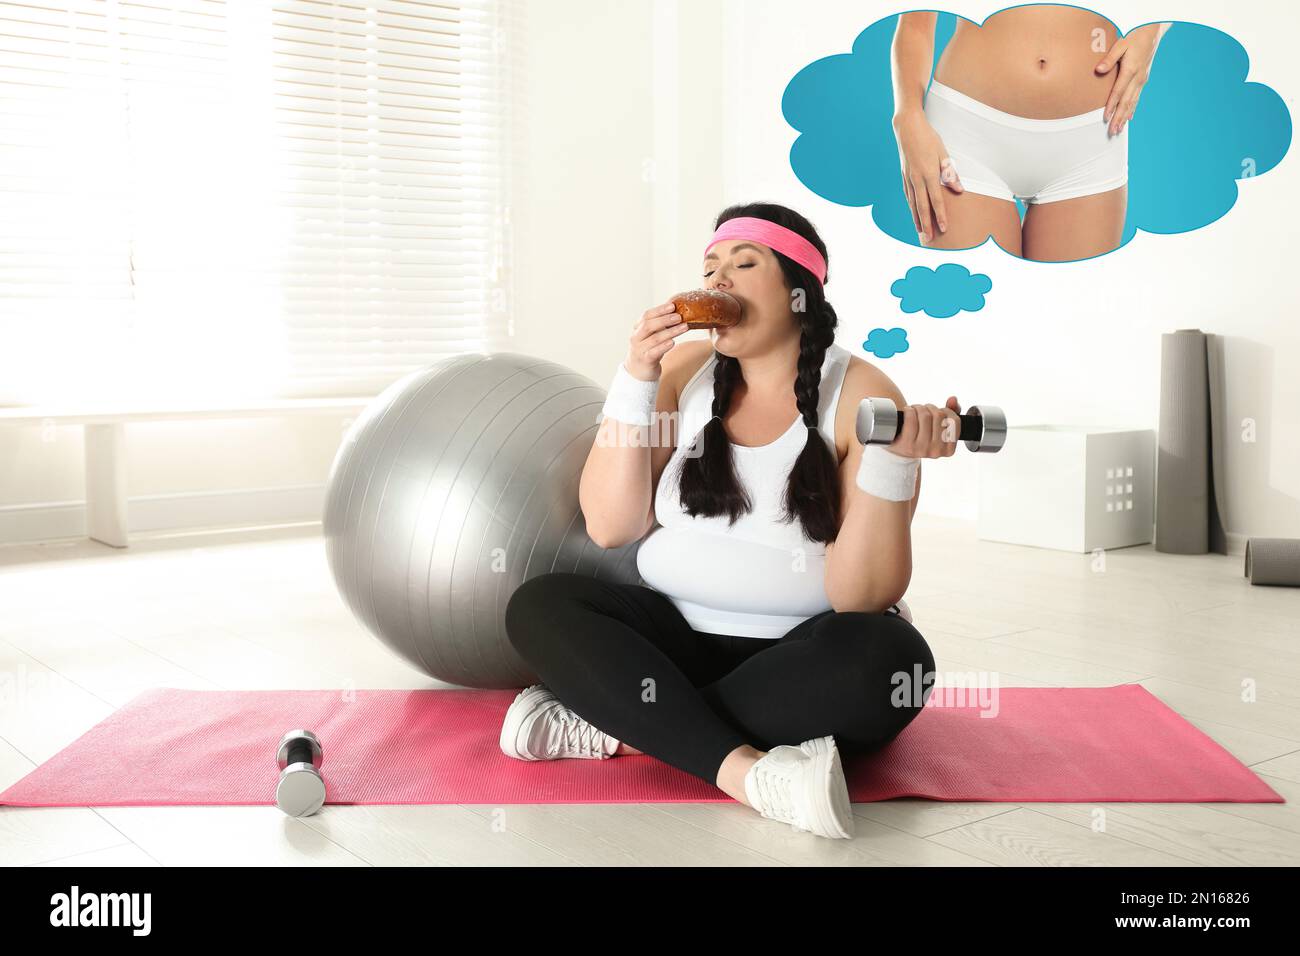 Overweight woman dreaming about slim body while pretending to do exercises and eating bun. Weight loss concept Stock Photo